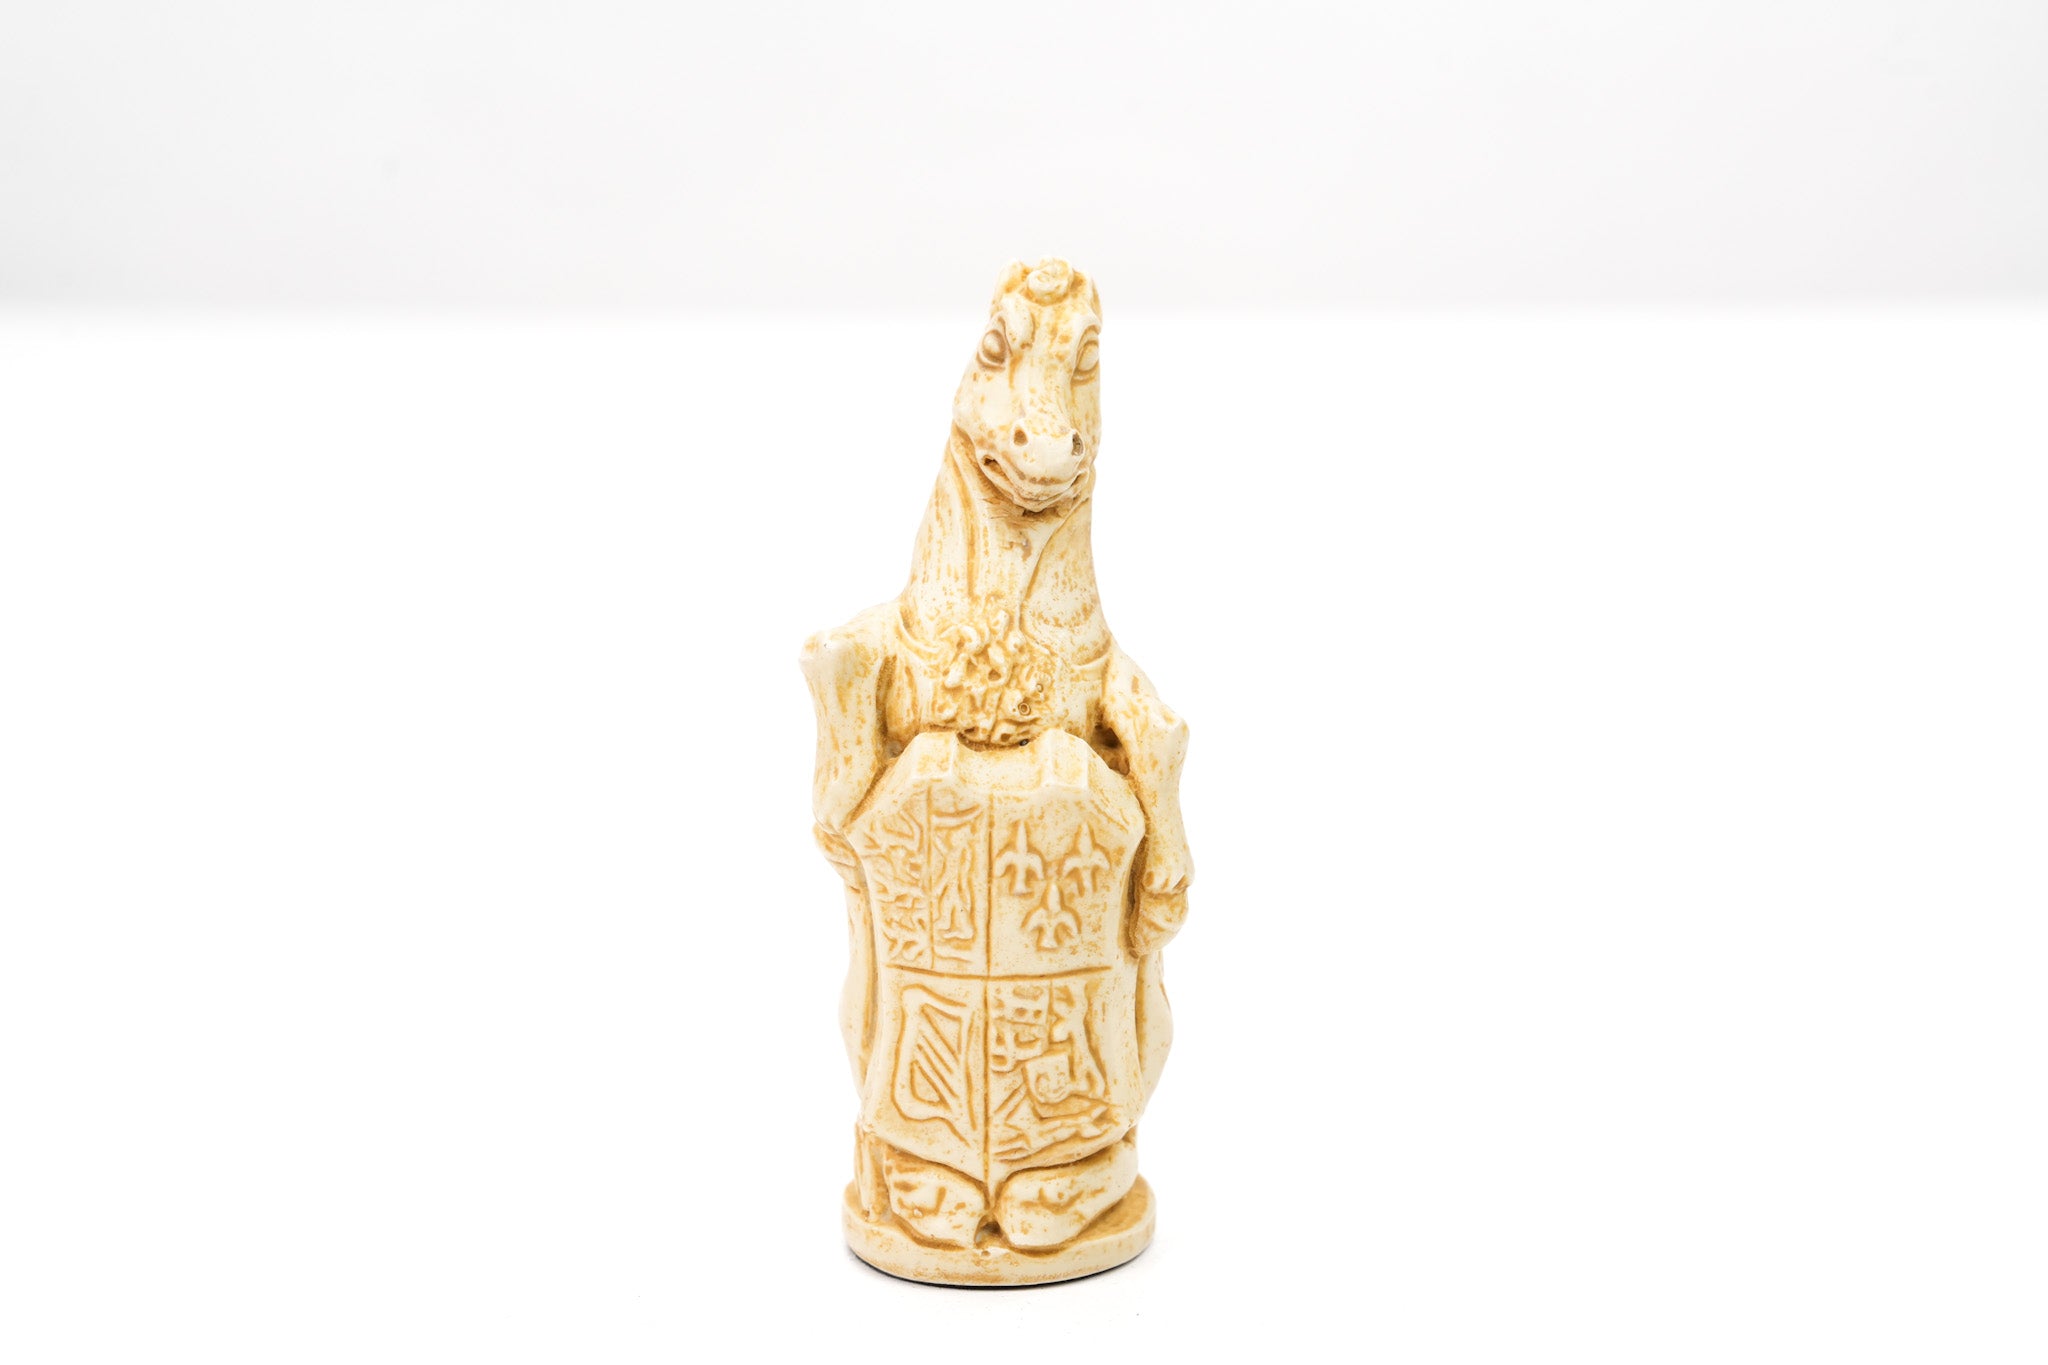 SINGLE REPLACEMENT PIECES: Royal Beasts Chess Pieces by Berkeley - Cardinal Red - Parts - Chess-House